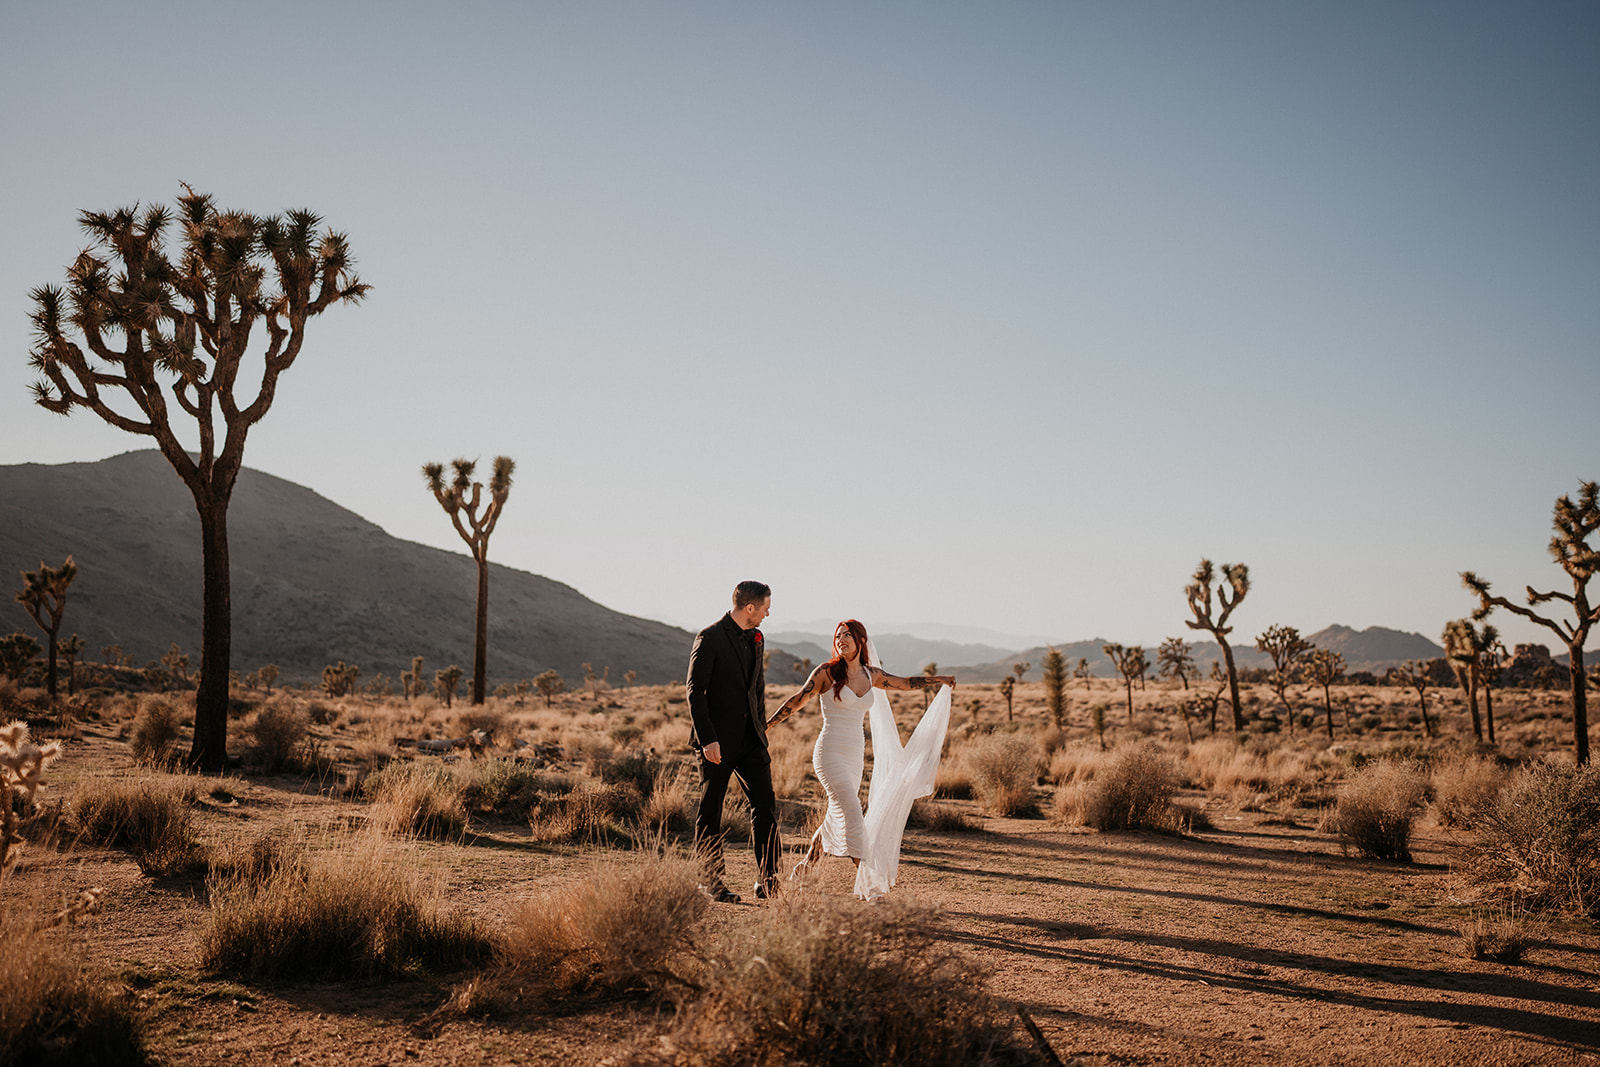 A Bride and Groom walk through Joshua Tree National Park after their intimate wedding ceremony.